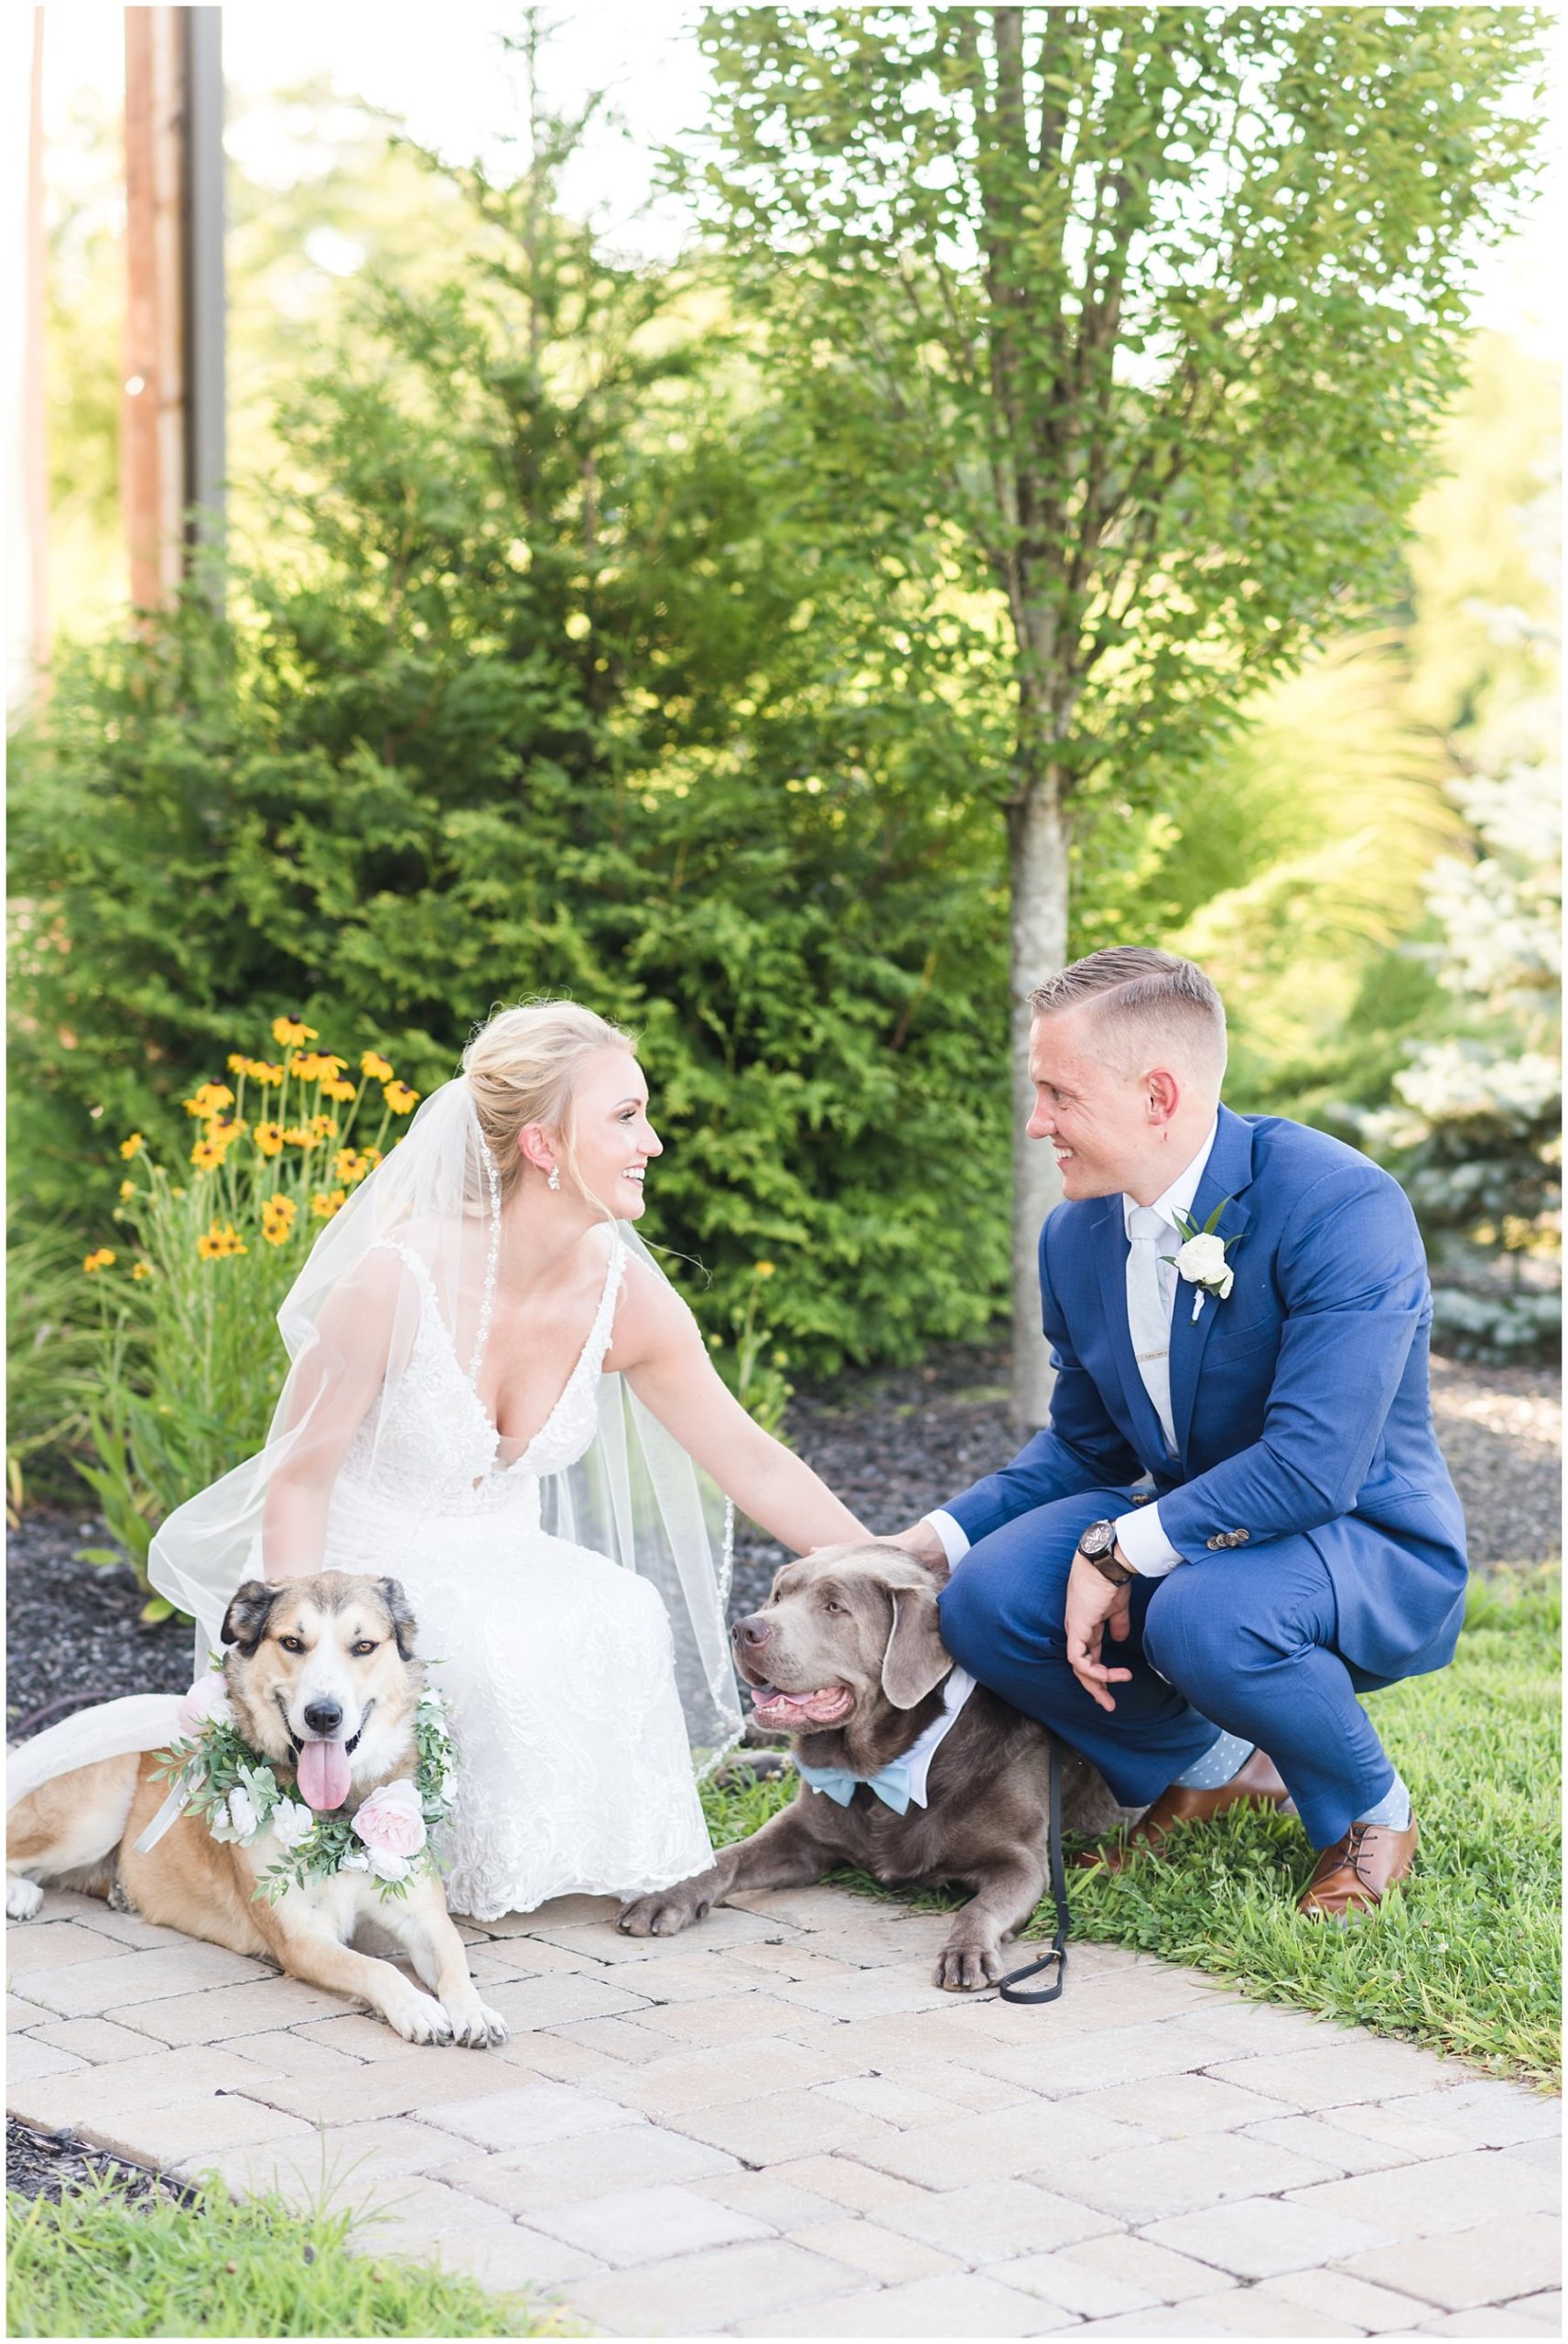 Nashville couple posing with their dogs for their wedding portraits at Tucker's Gap in Lebanon, TN